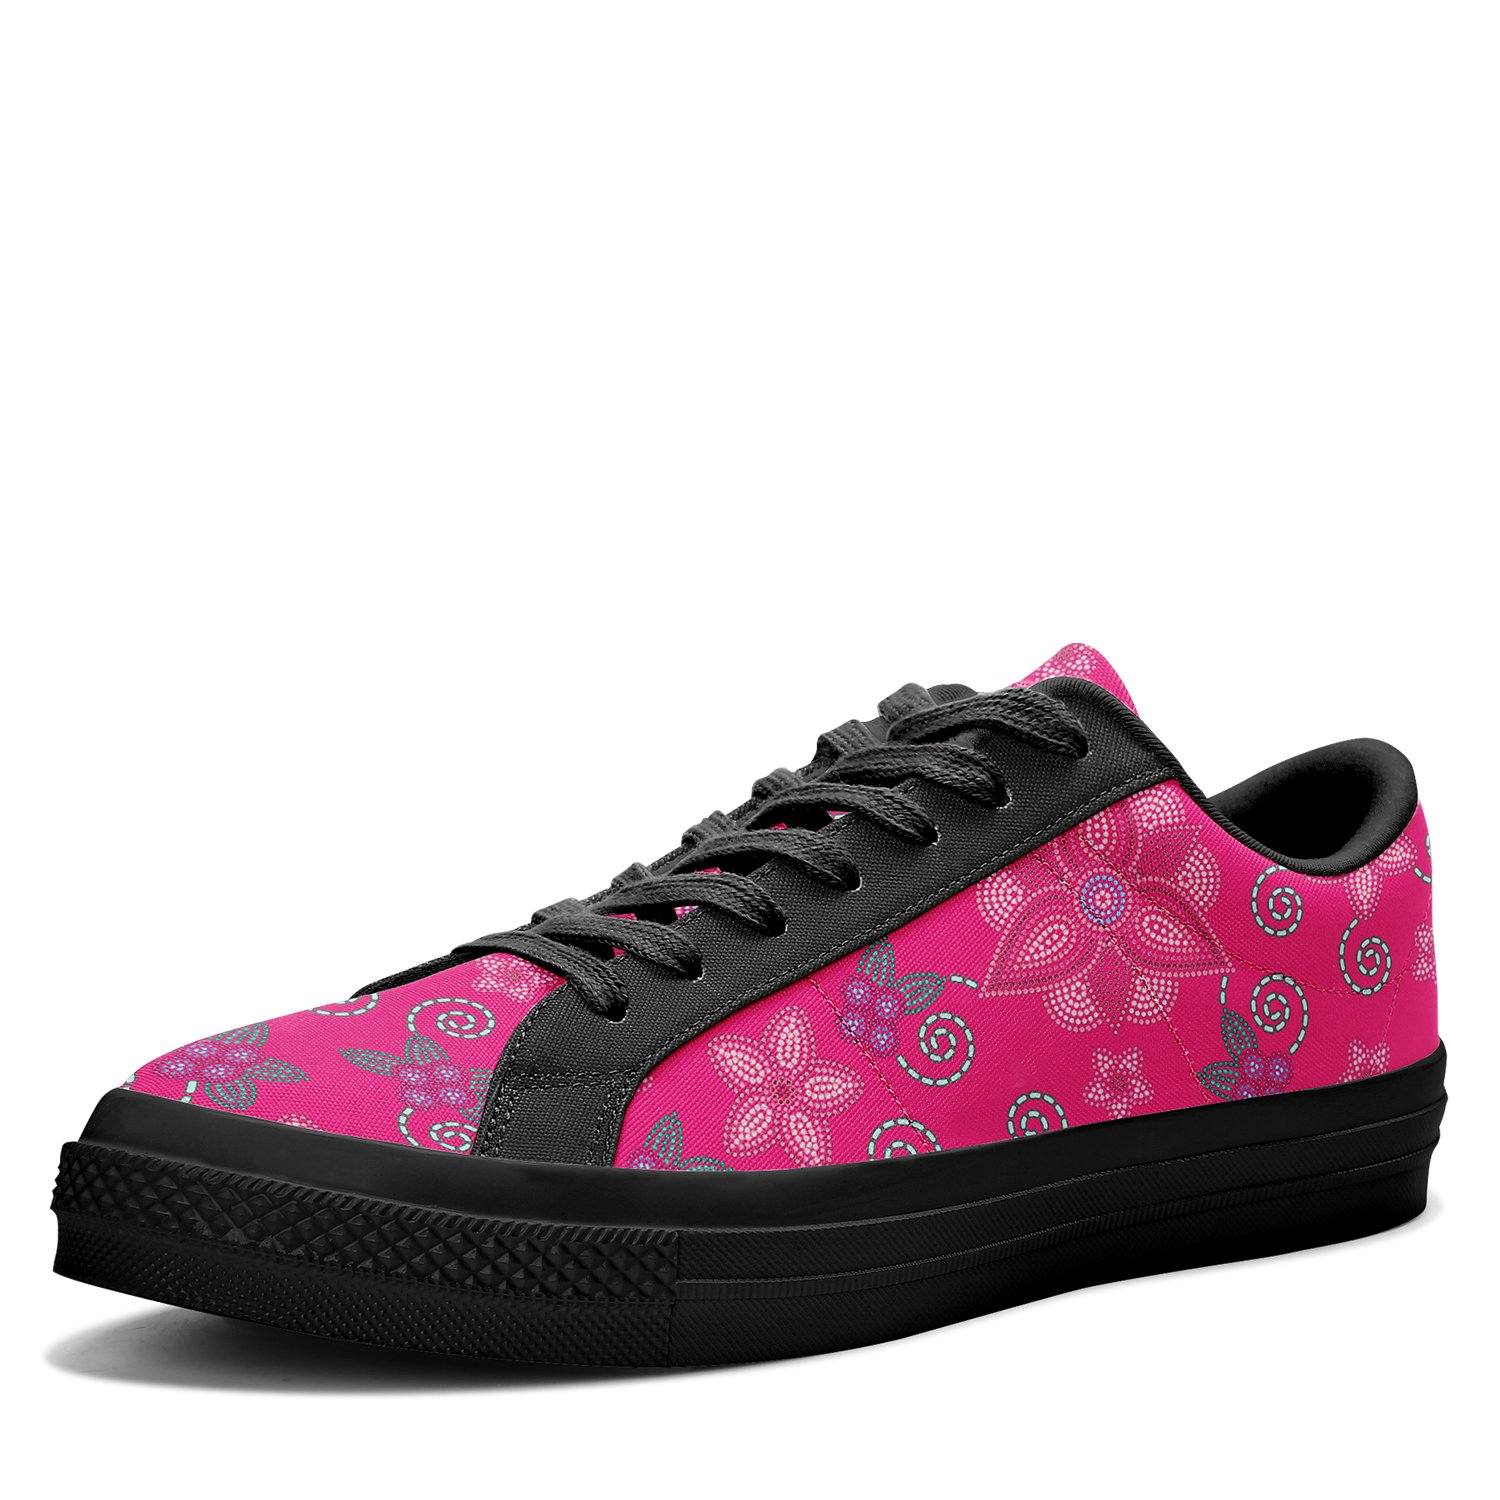 Berry Picking Pink Aapisi Low Top Canvas Shoes Black Sole aapisi Herman 